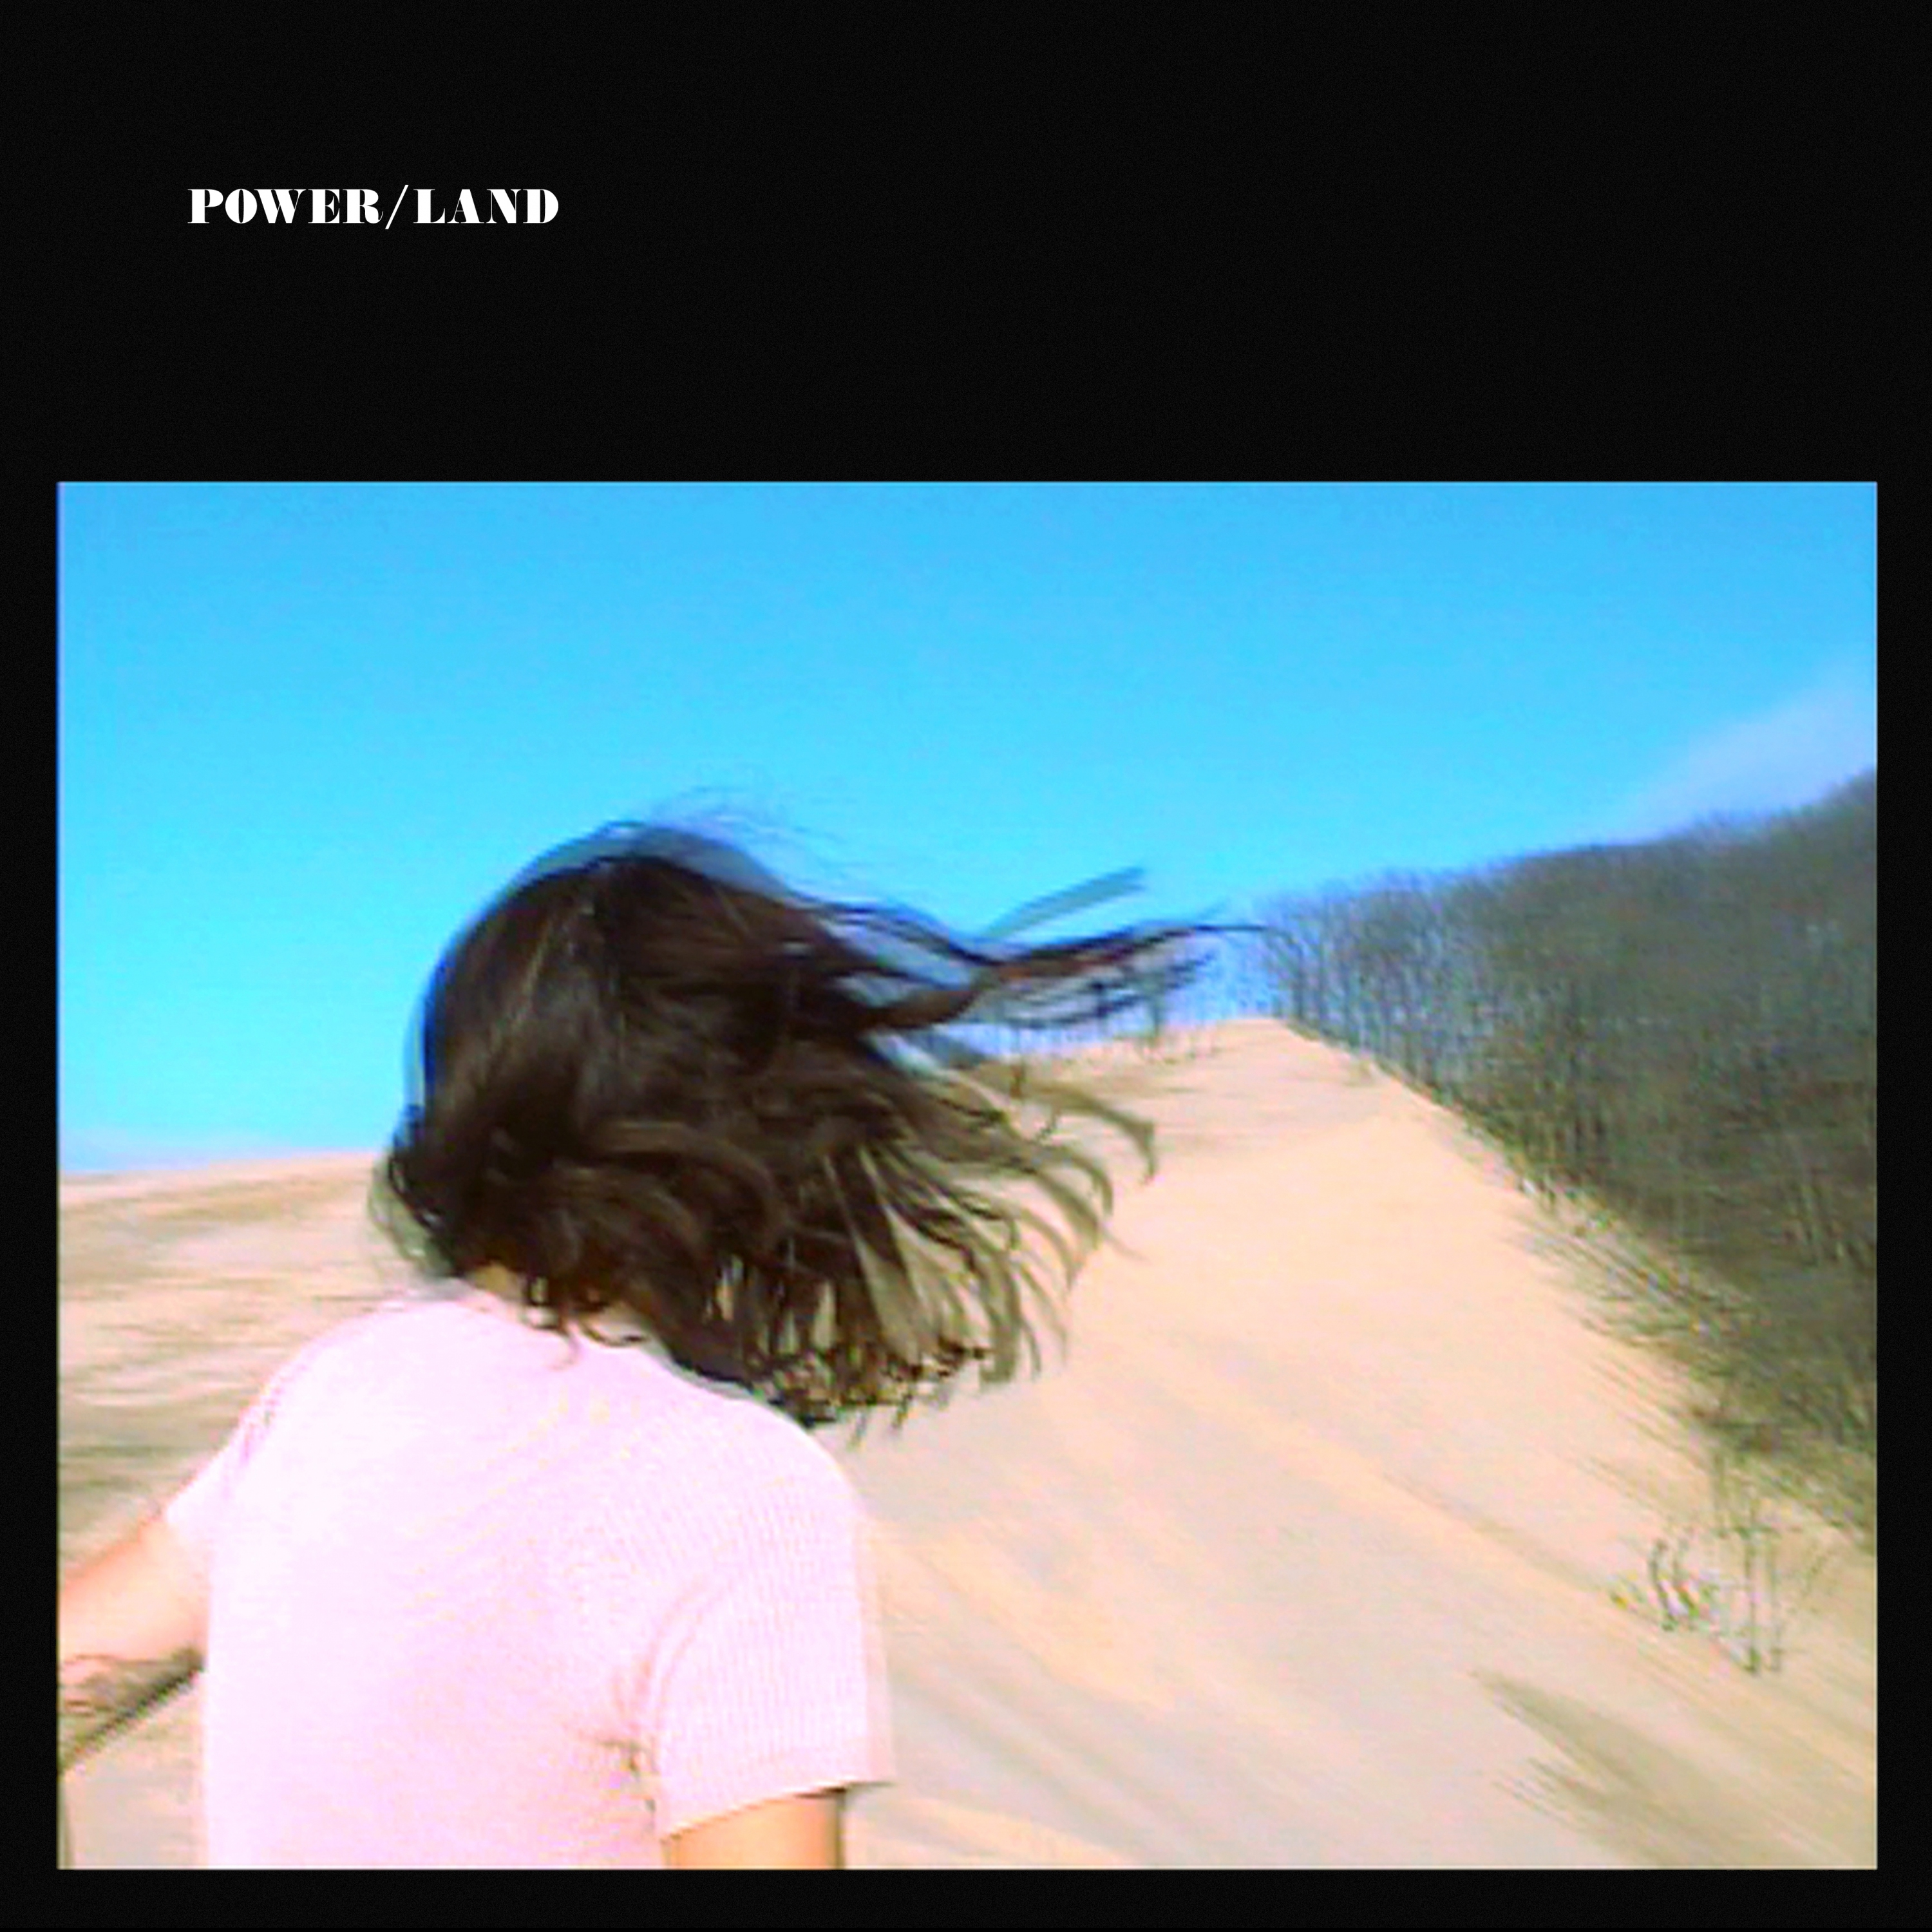 Haerts and Julian Klincewicz combine music and film for the new short 'Power/Land'. The soundtrack is now available via Itunes/Spotify.